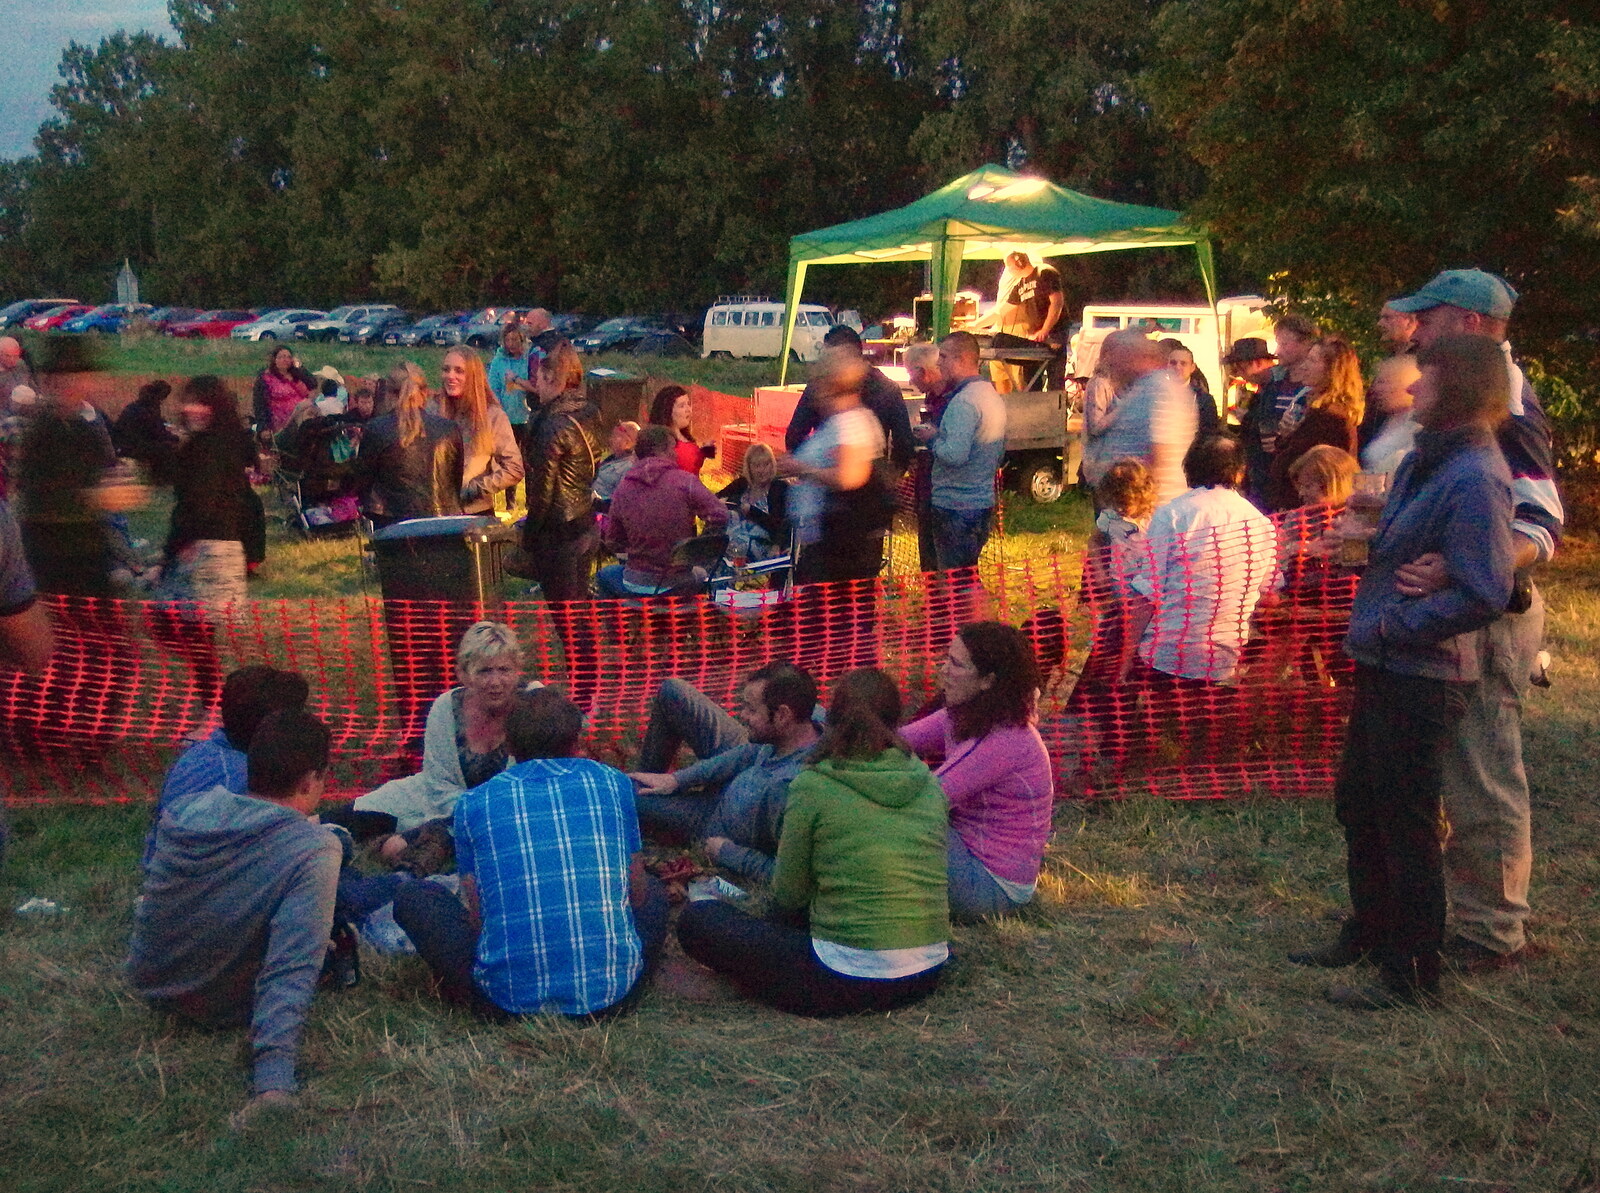 Crowds sit around in the gathering dusk in Mellis from Pigeon-Eating Hawks and the Mellis Beer Festival, London and Suffolk - 31st August 2013